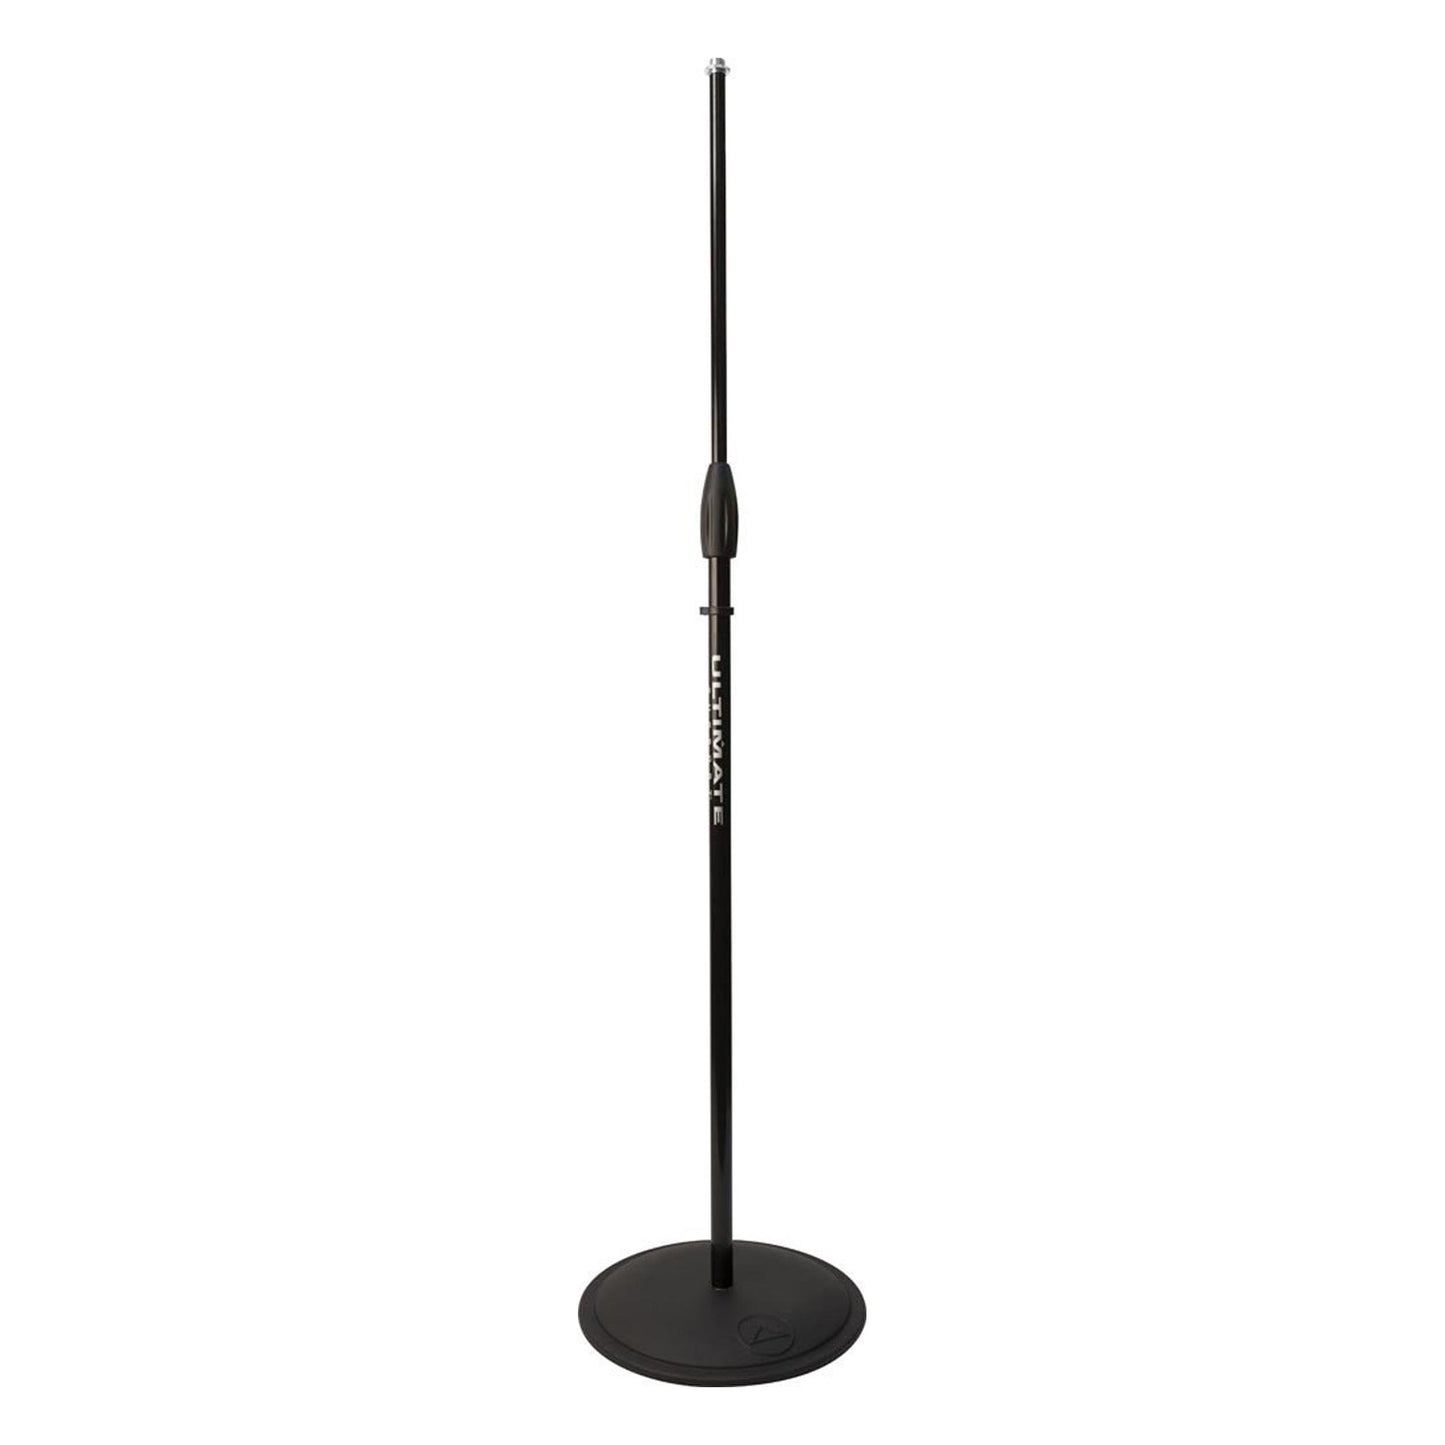 Ultimate Support Microphone Stand in Black - PRO-R-ST